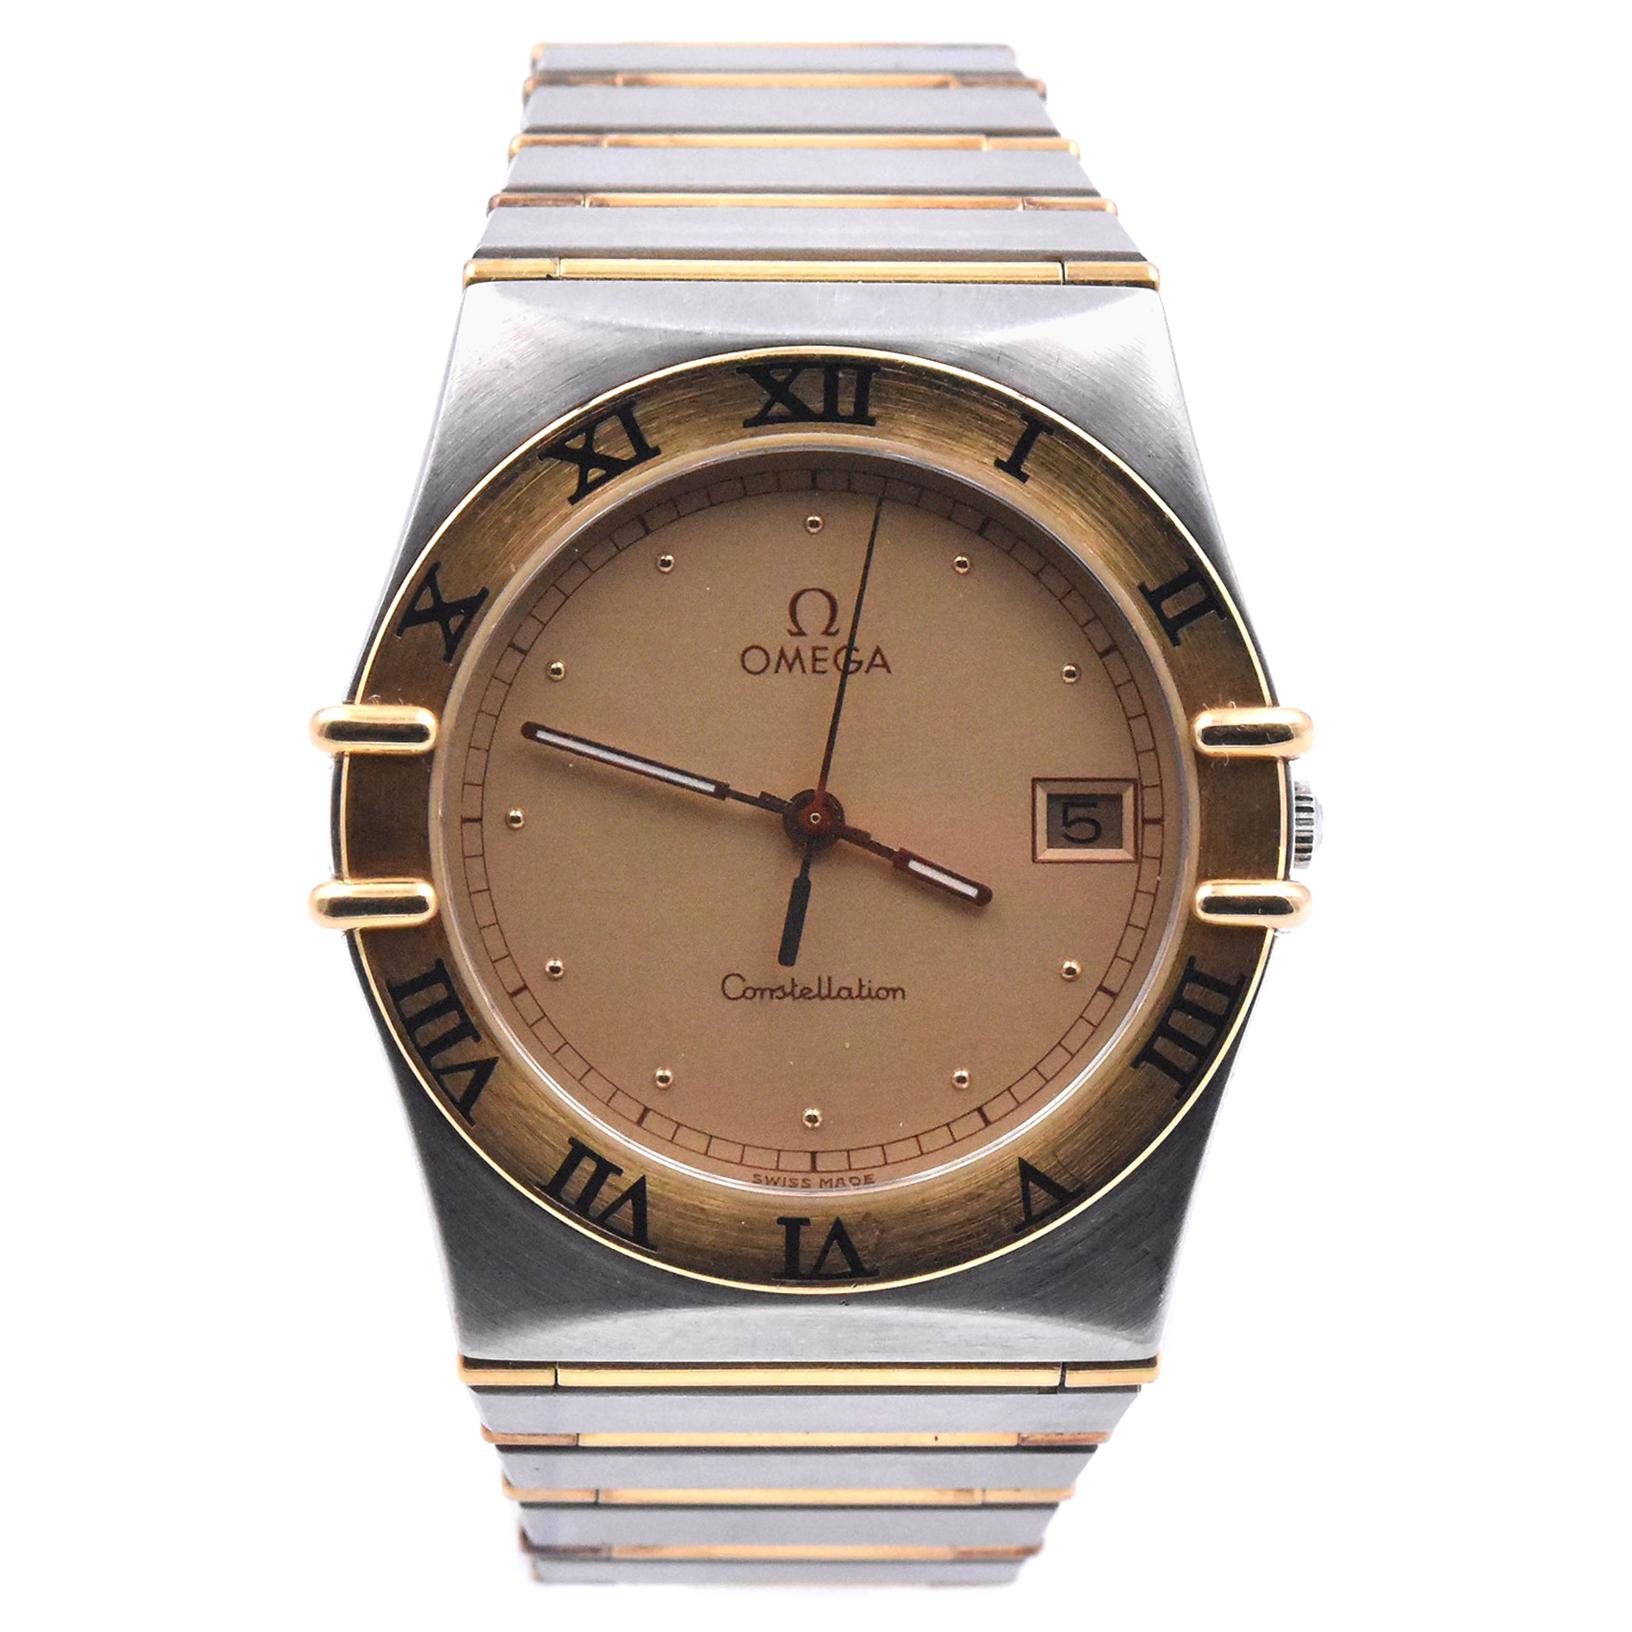 Omega Constellation Two-Tone Watch Ref. 1448/431